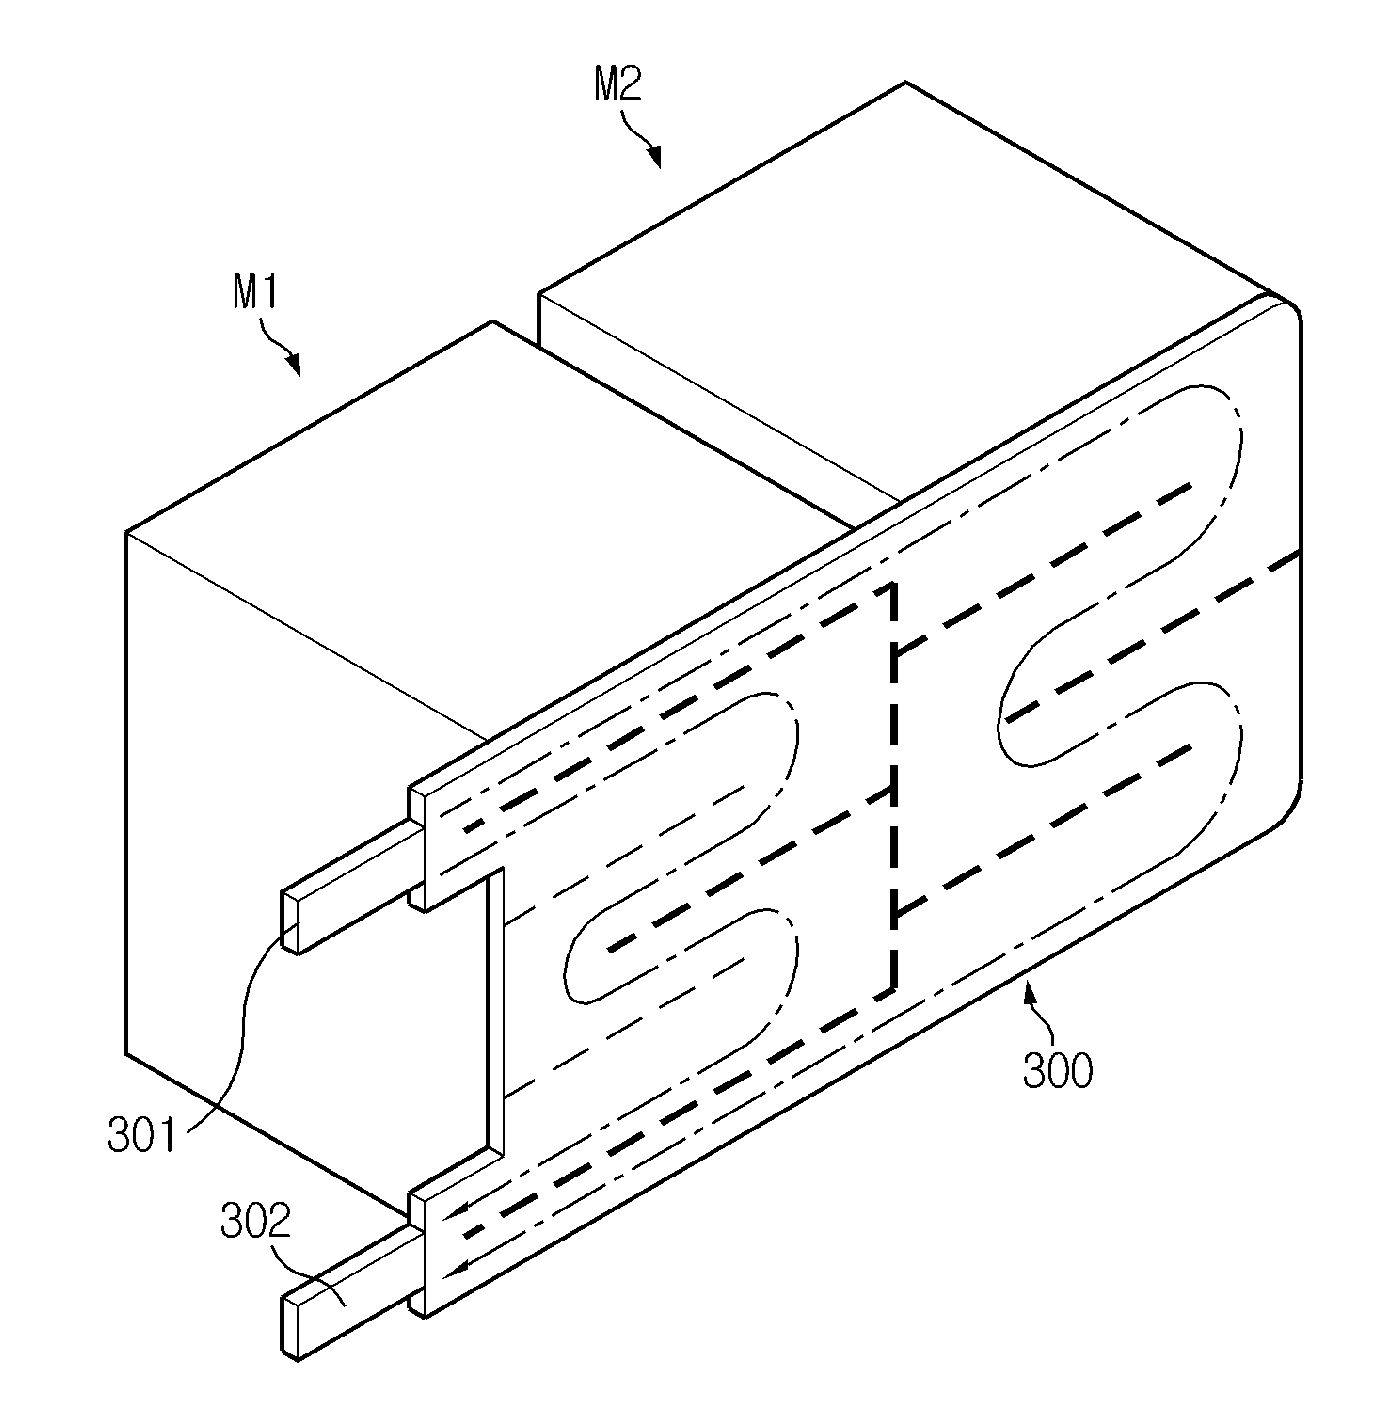 Heat sink having two or more separated channels arranged vertically with common inlet and common outlet